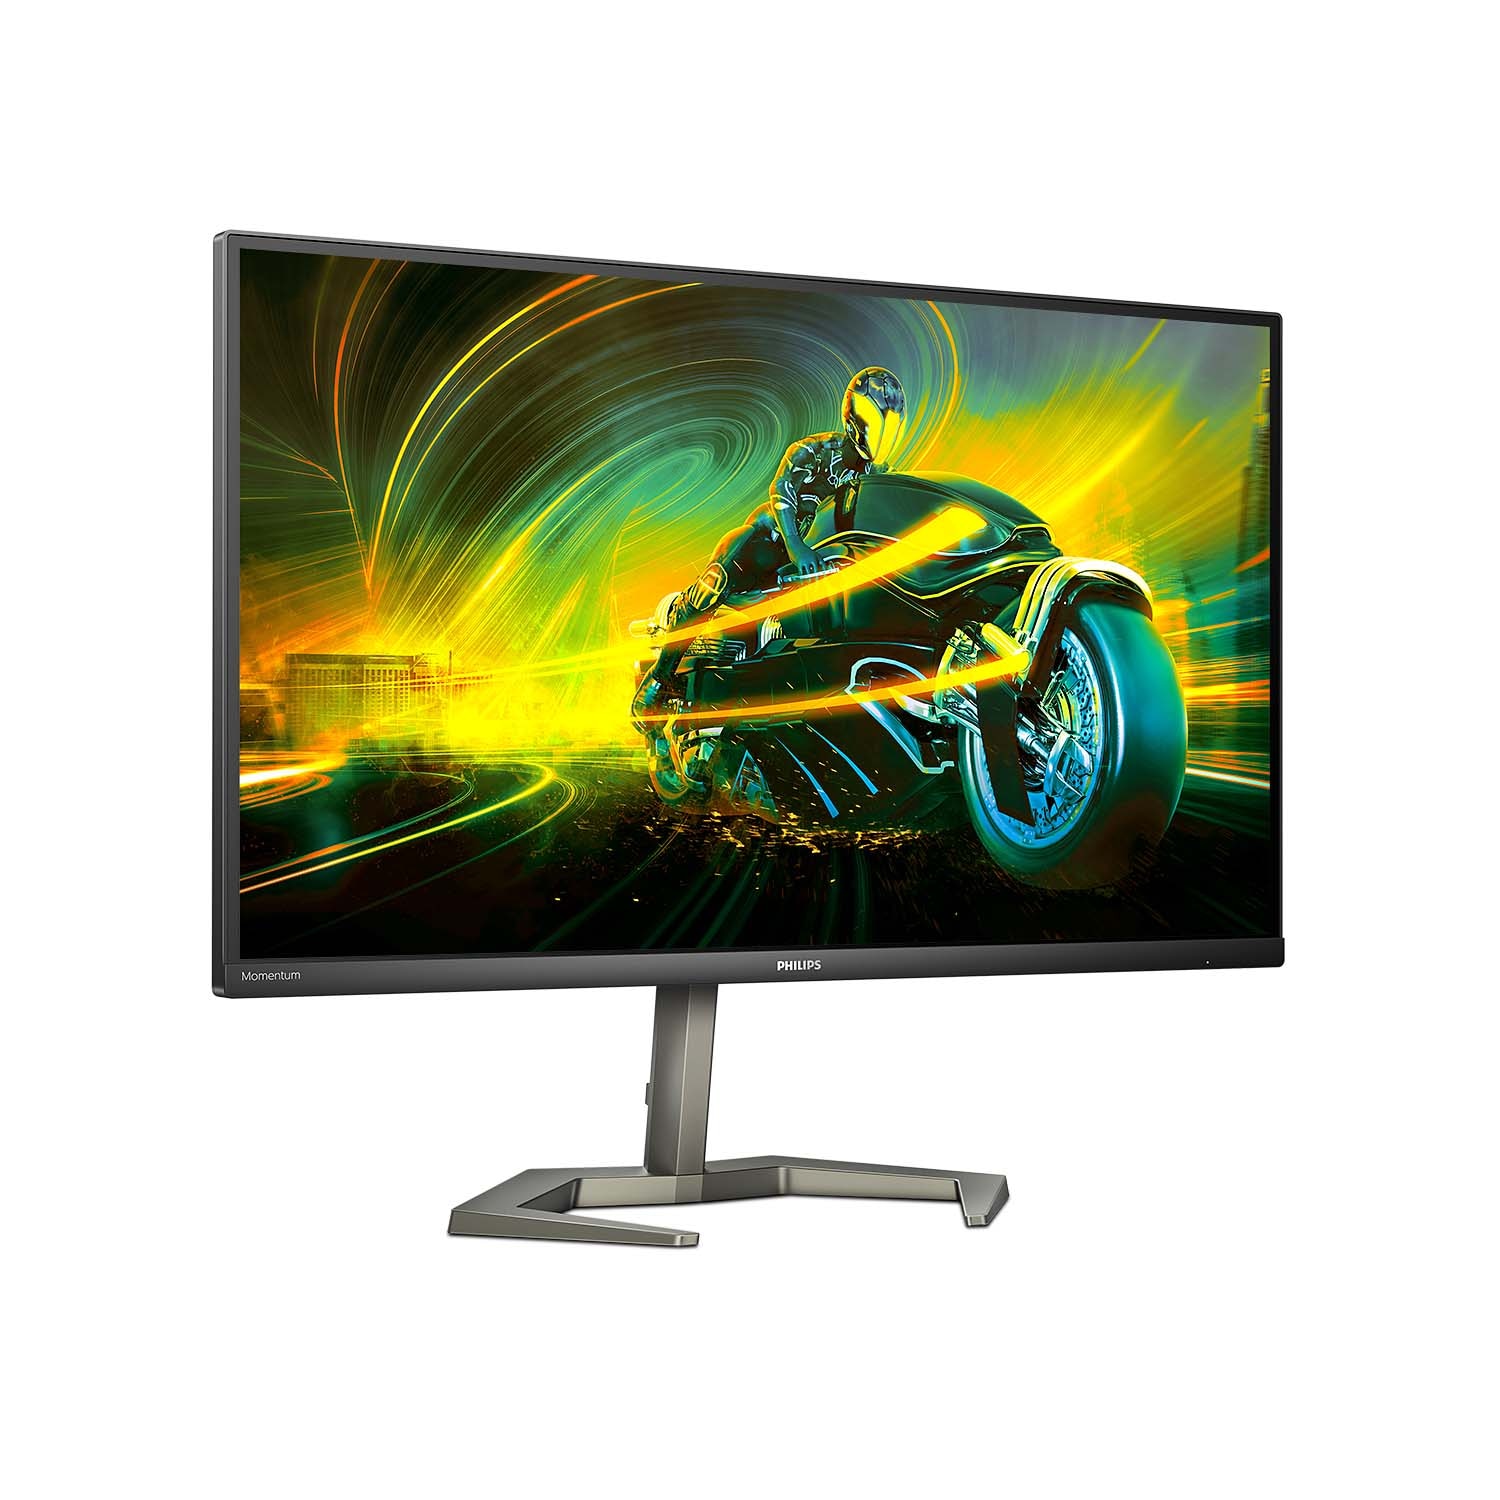 Philips Gaming-Monitor »27M1N5200PA«, 68,5 cm/27 Zoll, 1920 x 1080 px, 0,5 ms Reaktionszeit, 240 Hz